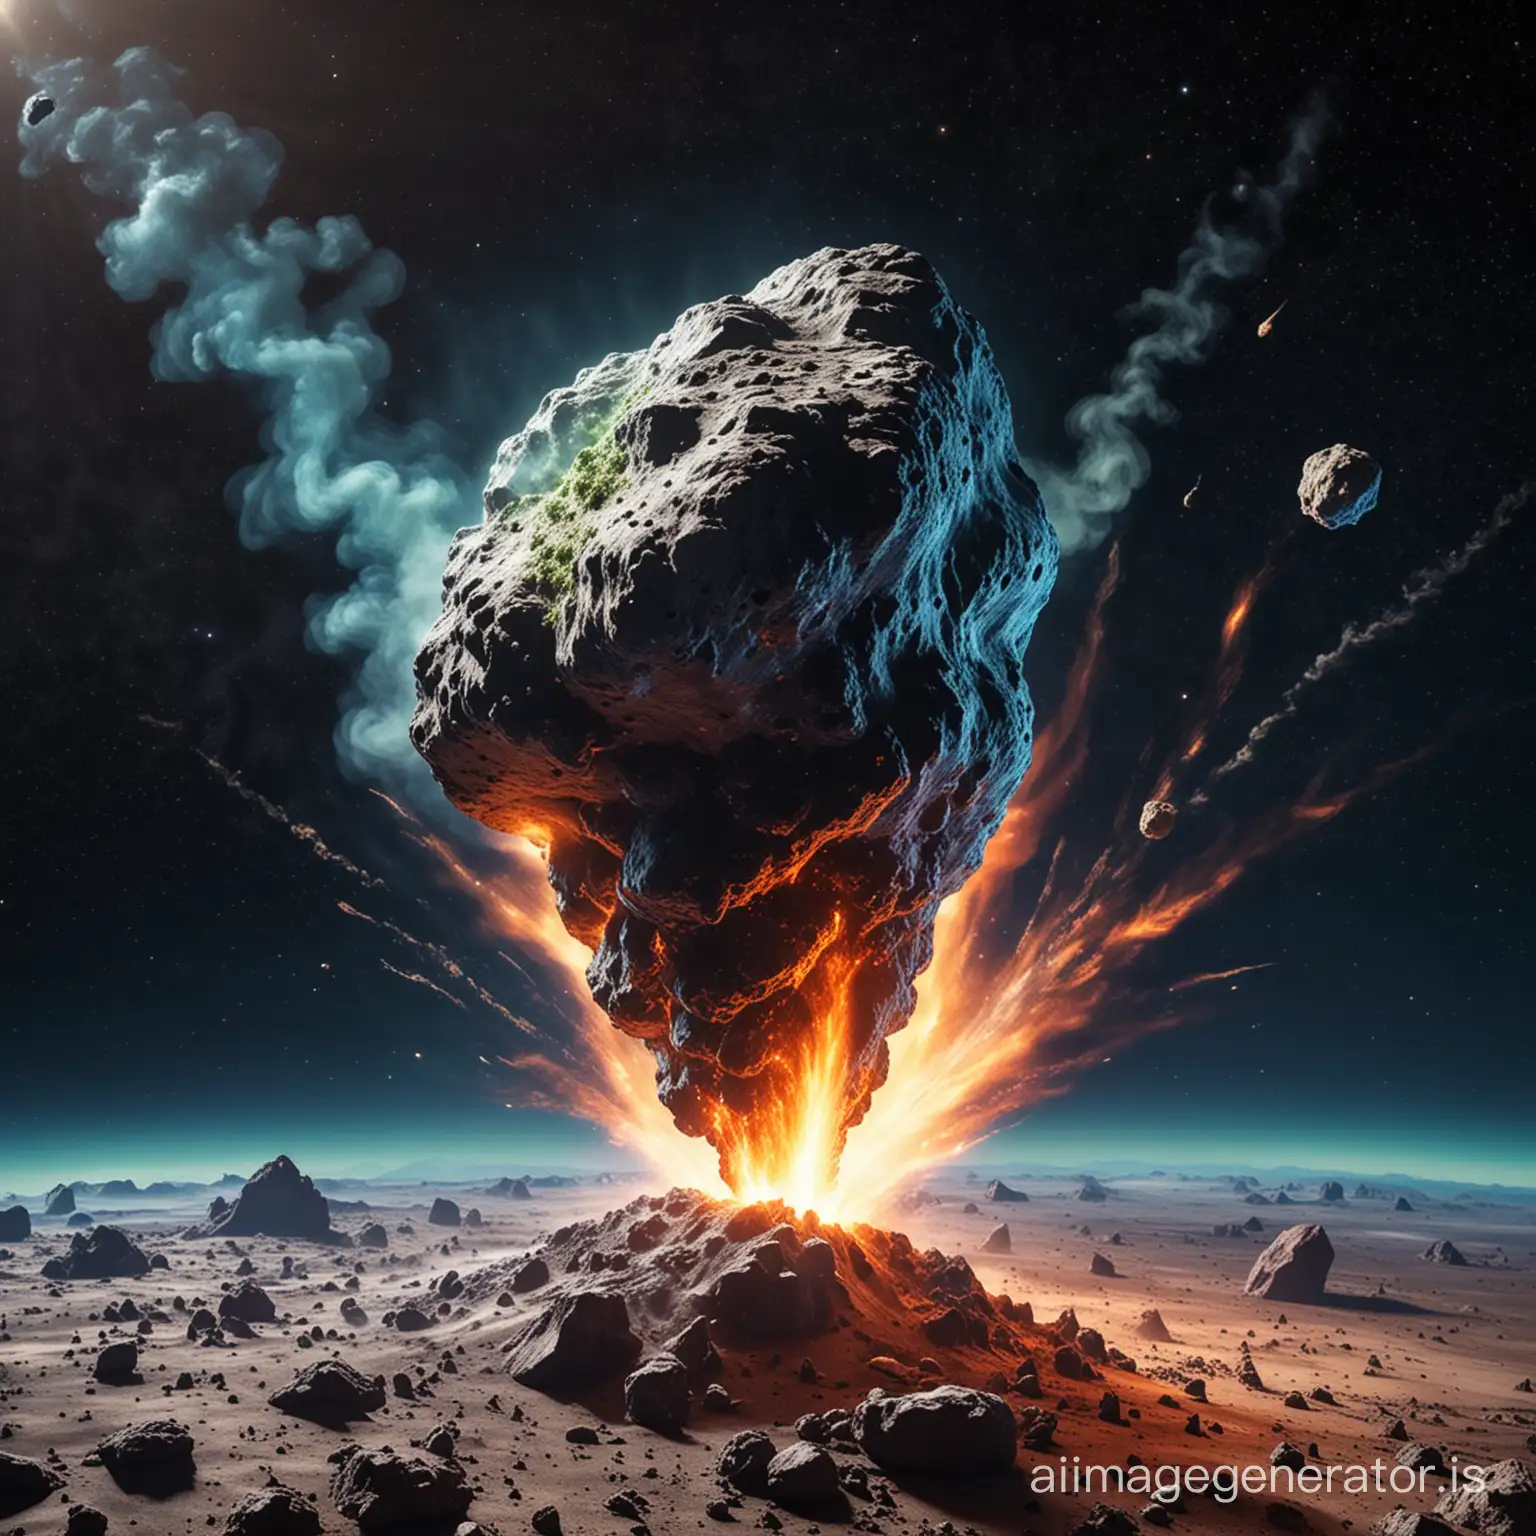 A  Vibrant asteroid made out of Marijuana is burning up in earth's atmosphere as it's blasting towards earth.